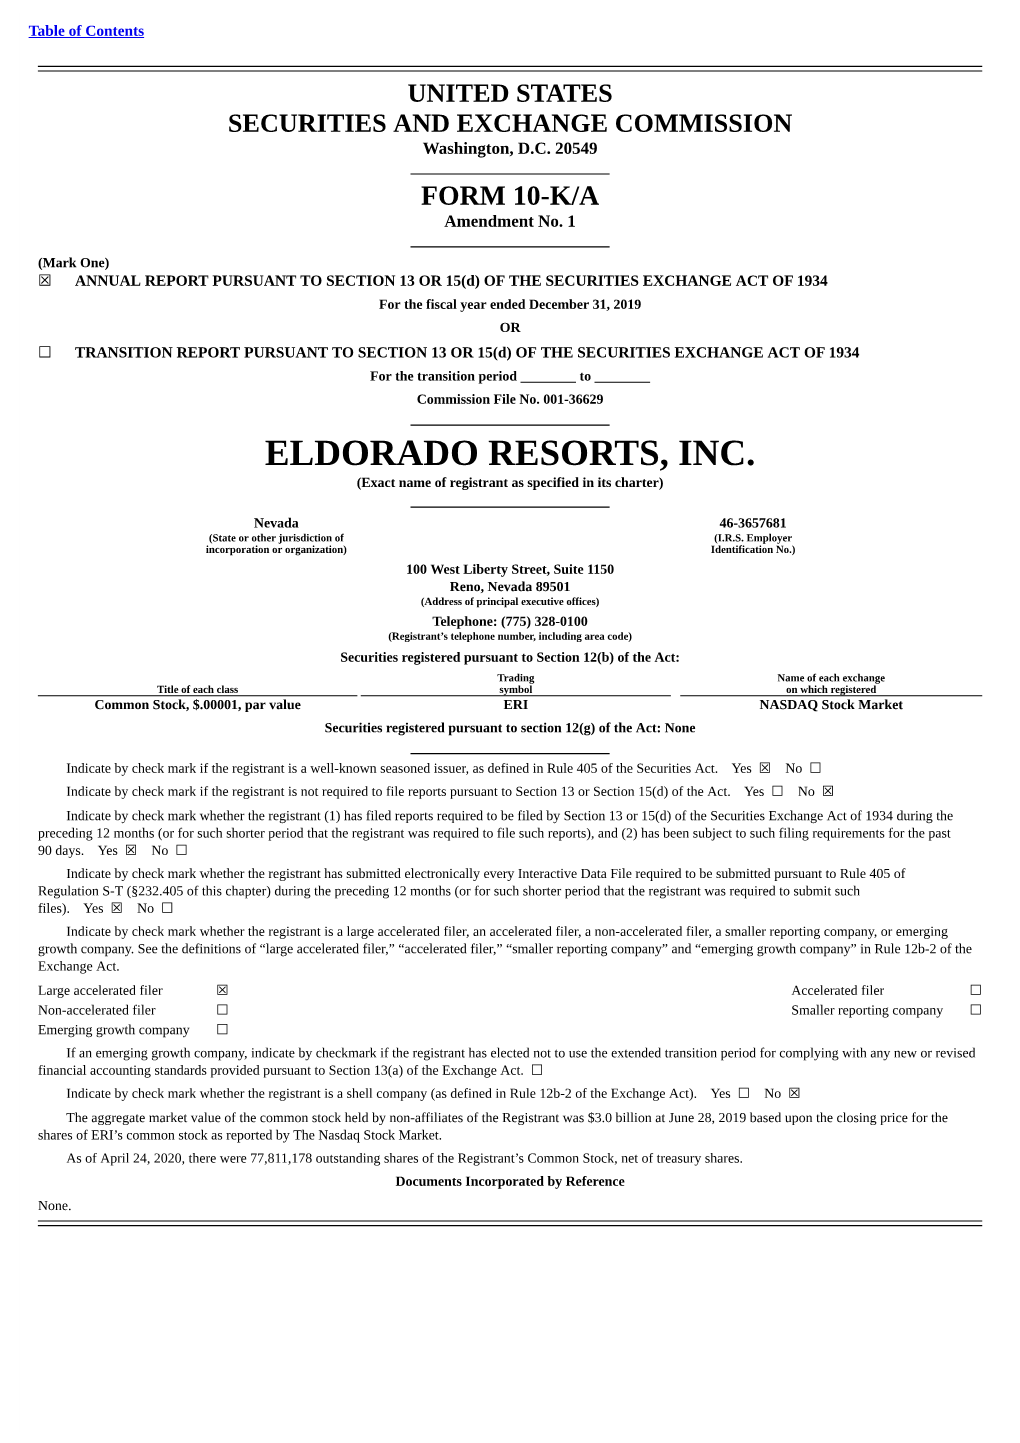 ELDORADO RESORTS, INC. (Exact Name of Registrant As Specified in Its Charter)